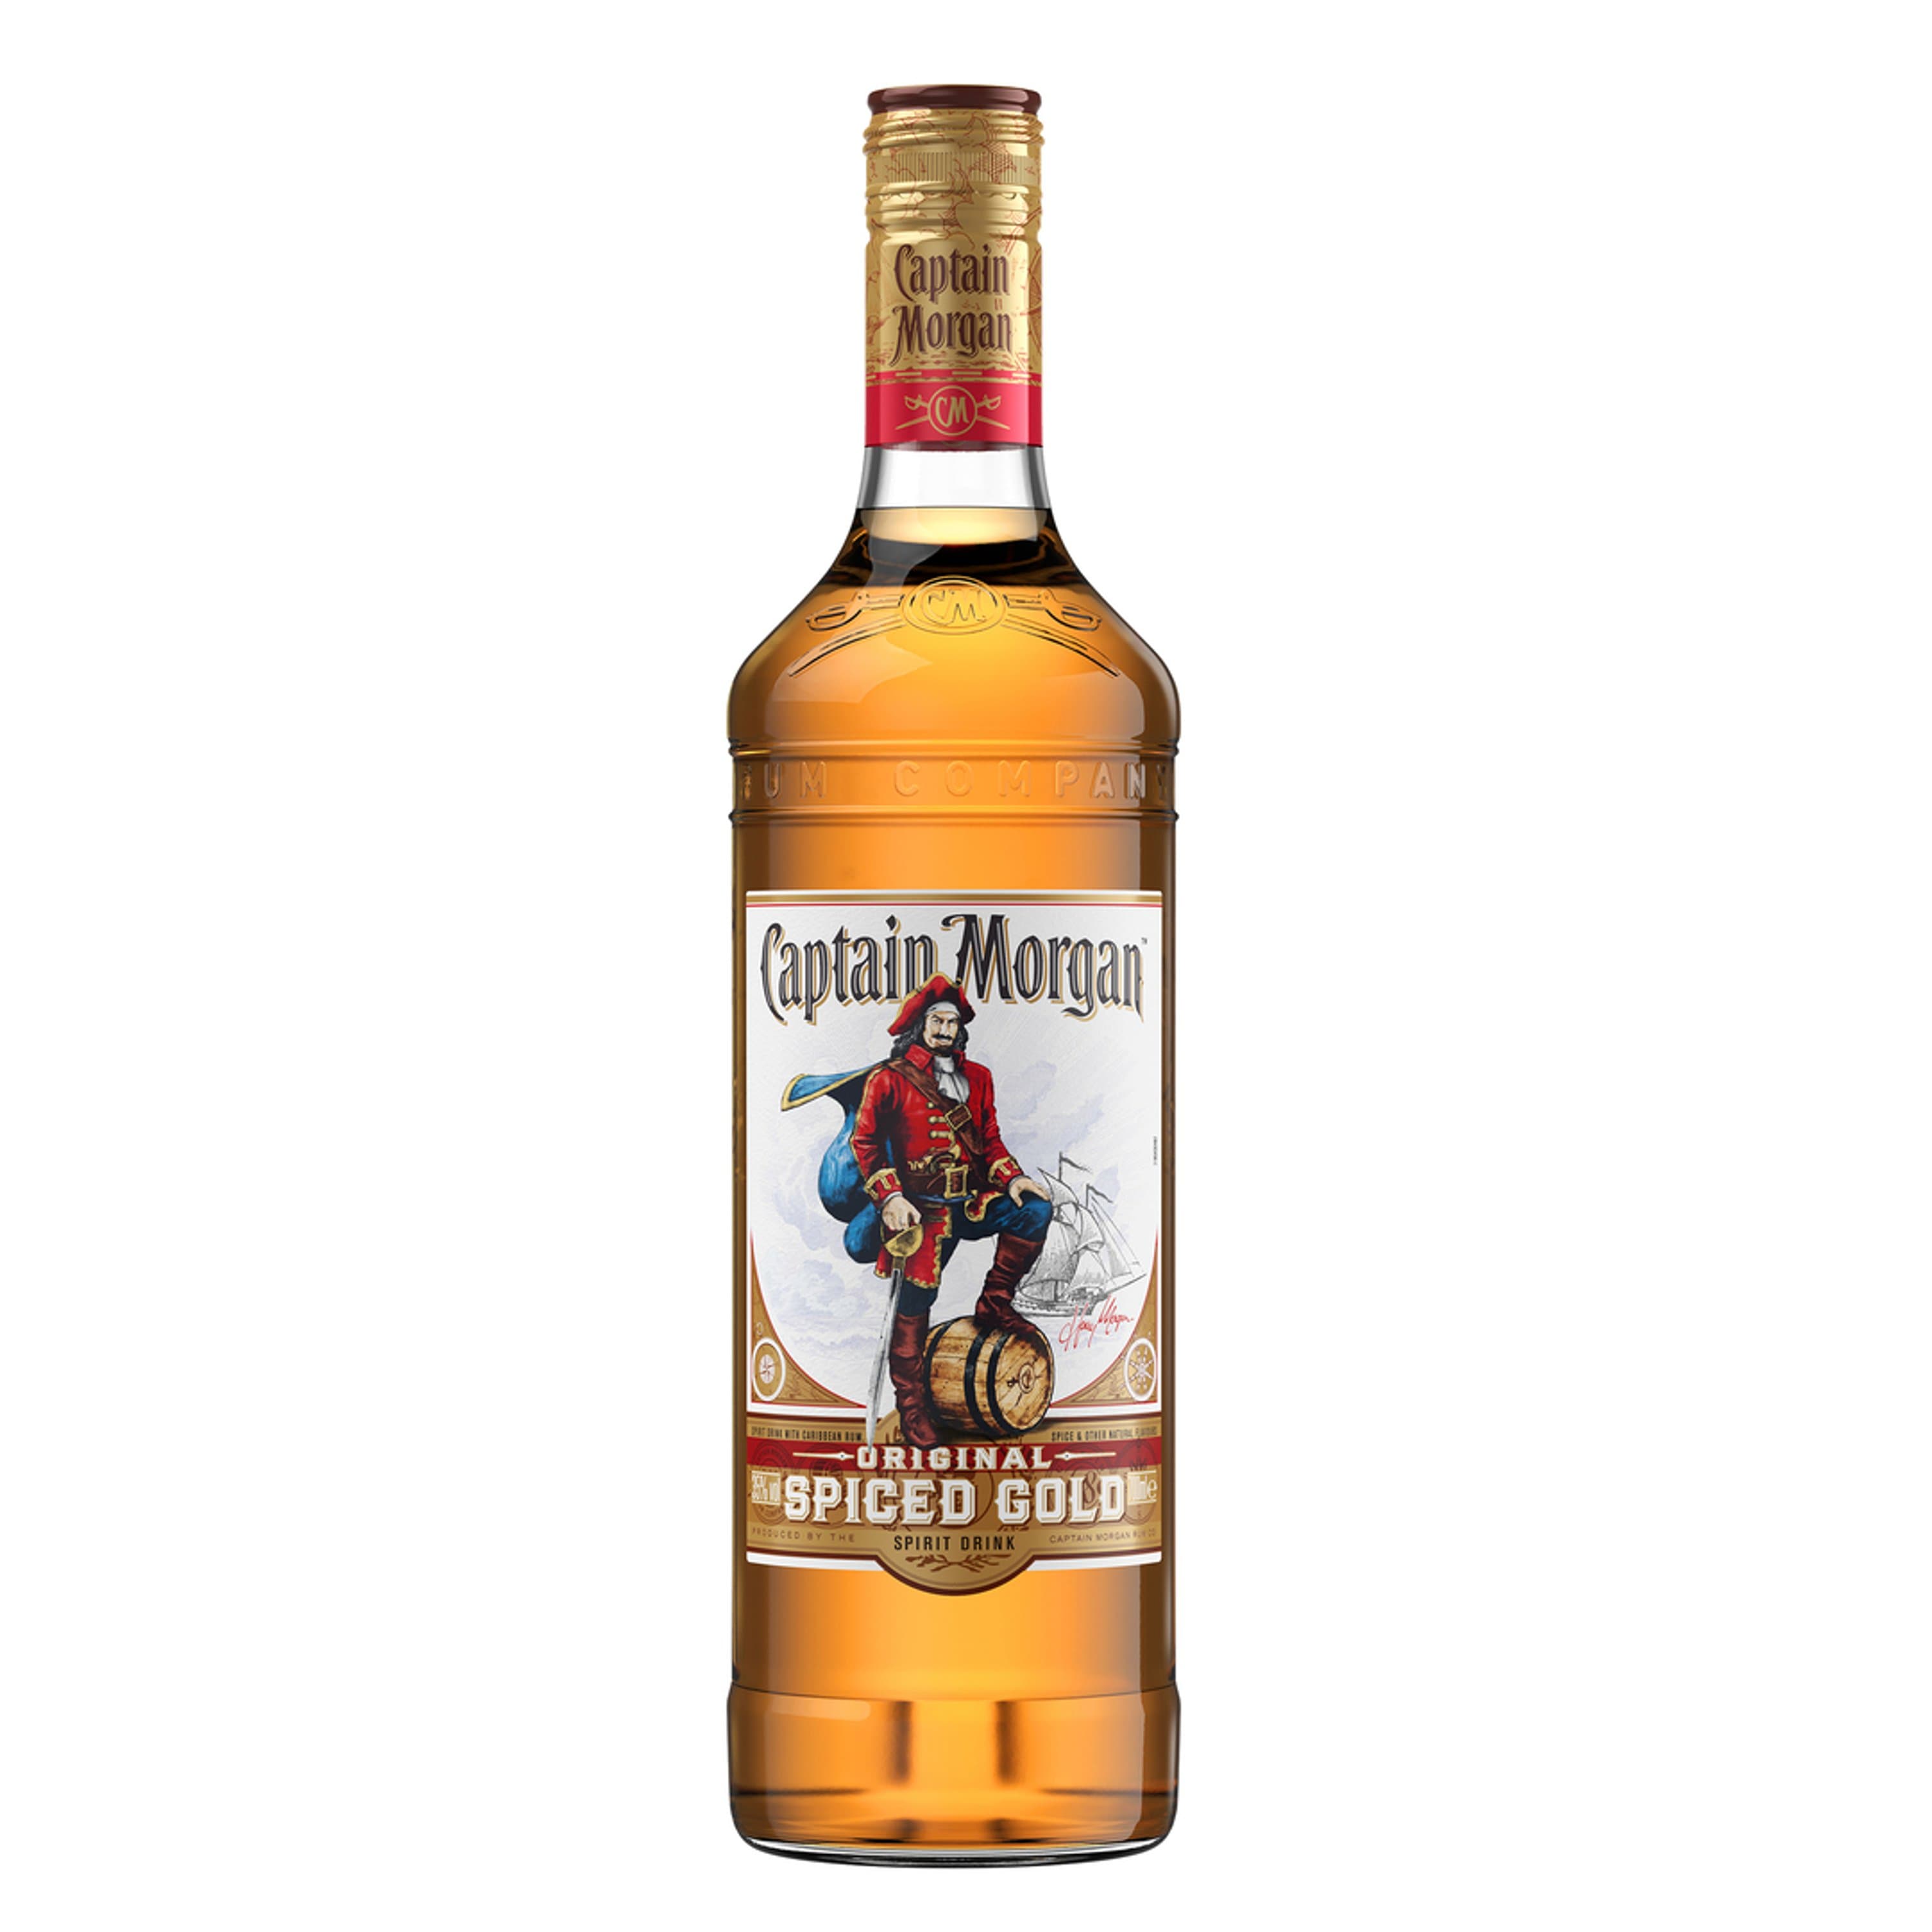 Barcom Image Product Front 9145214 Captainmorganspiced